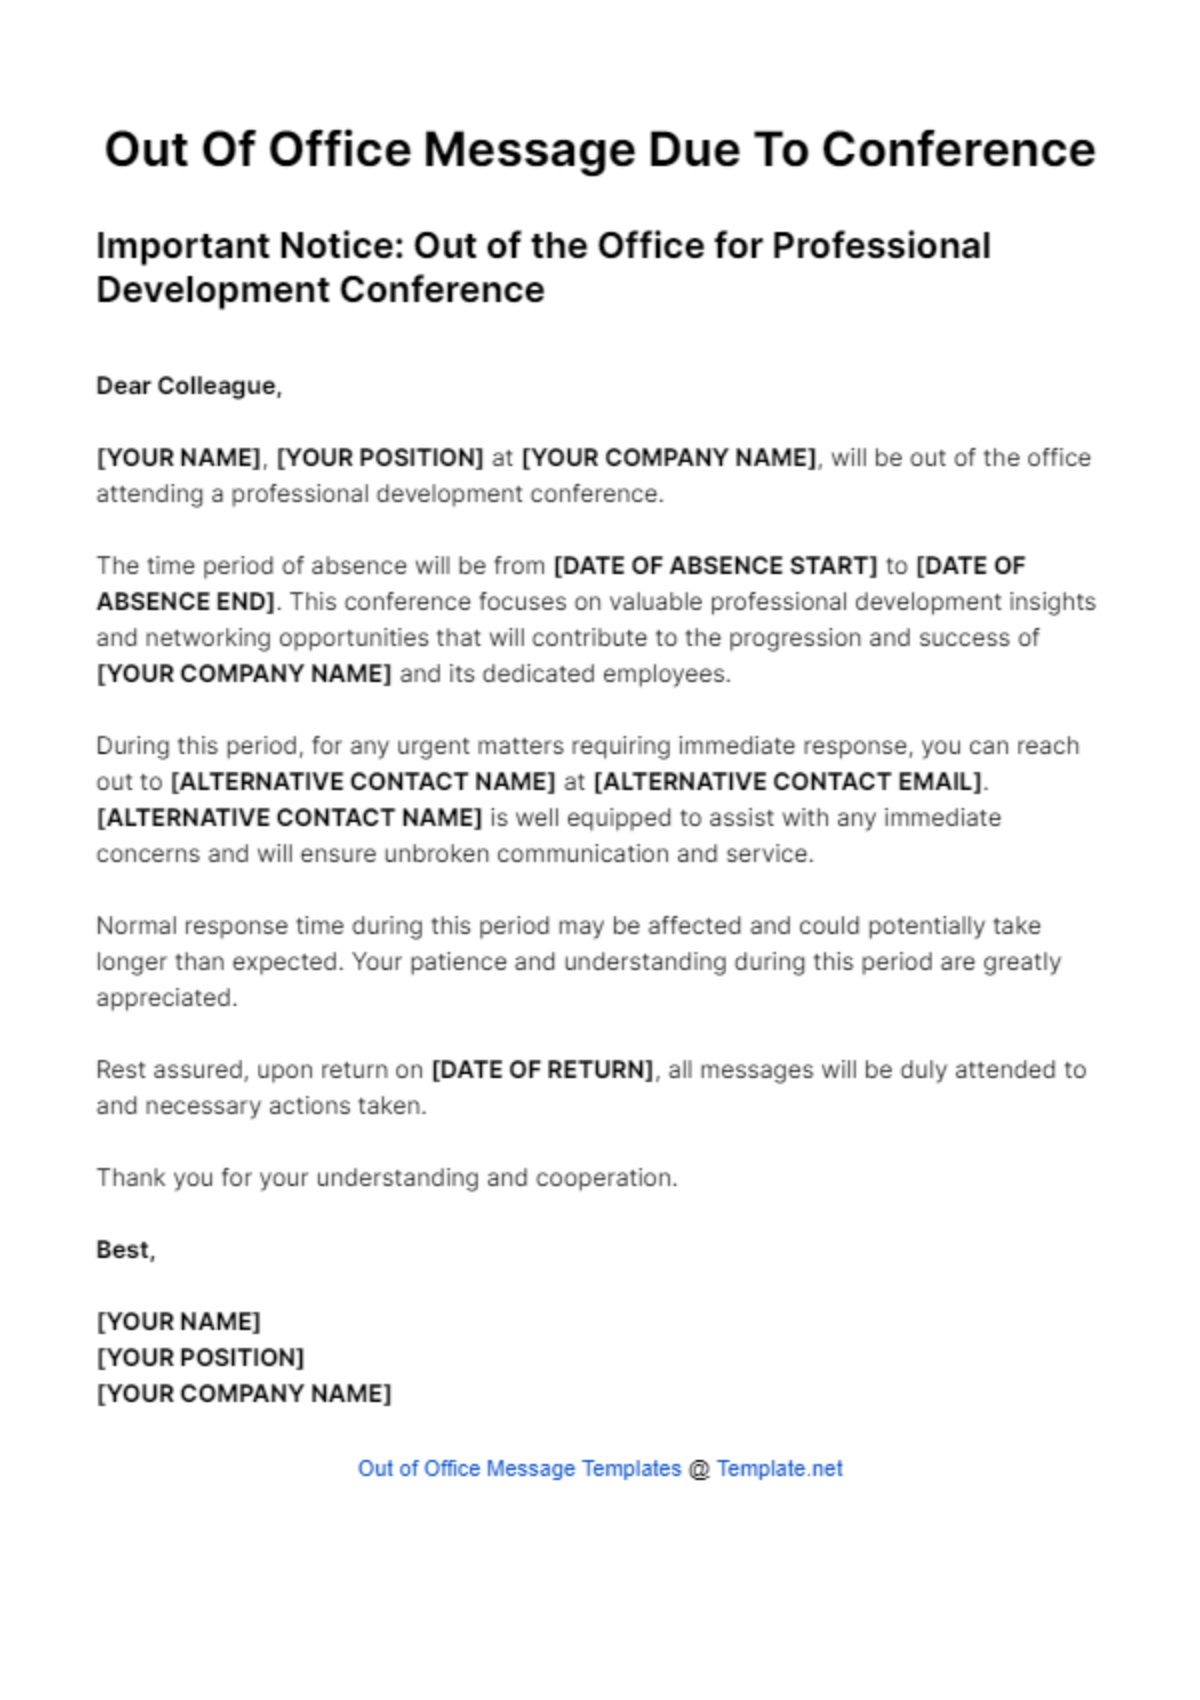 Free Out Of Office Message Due To Conference Template